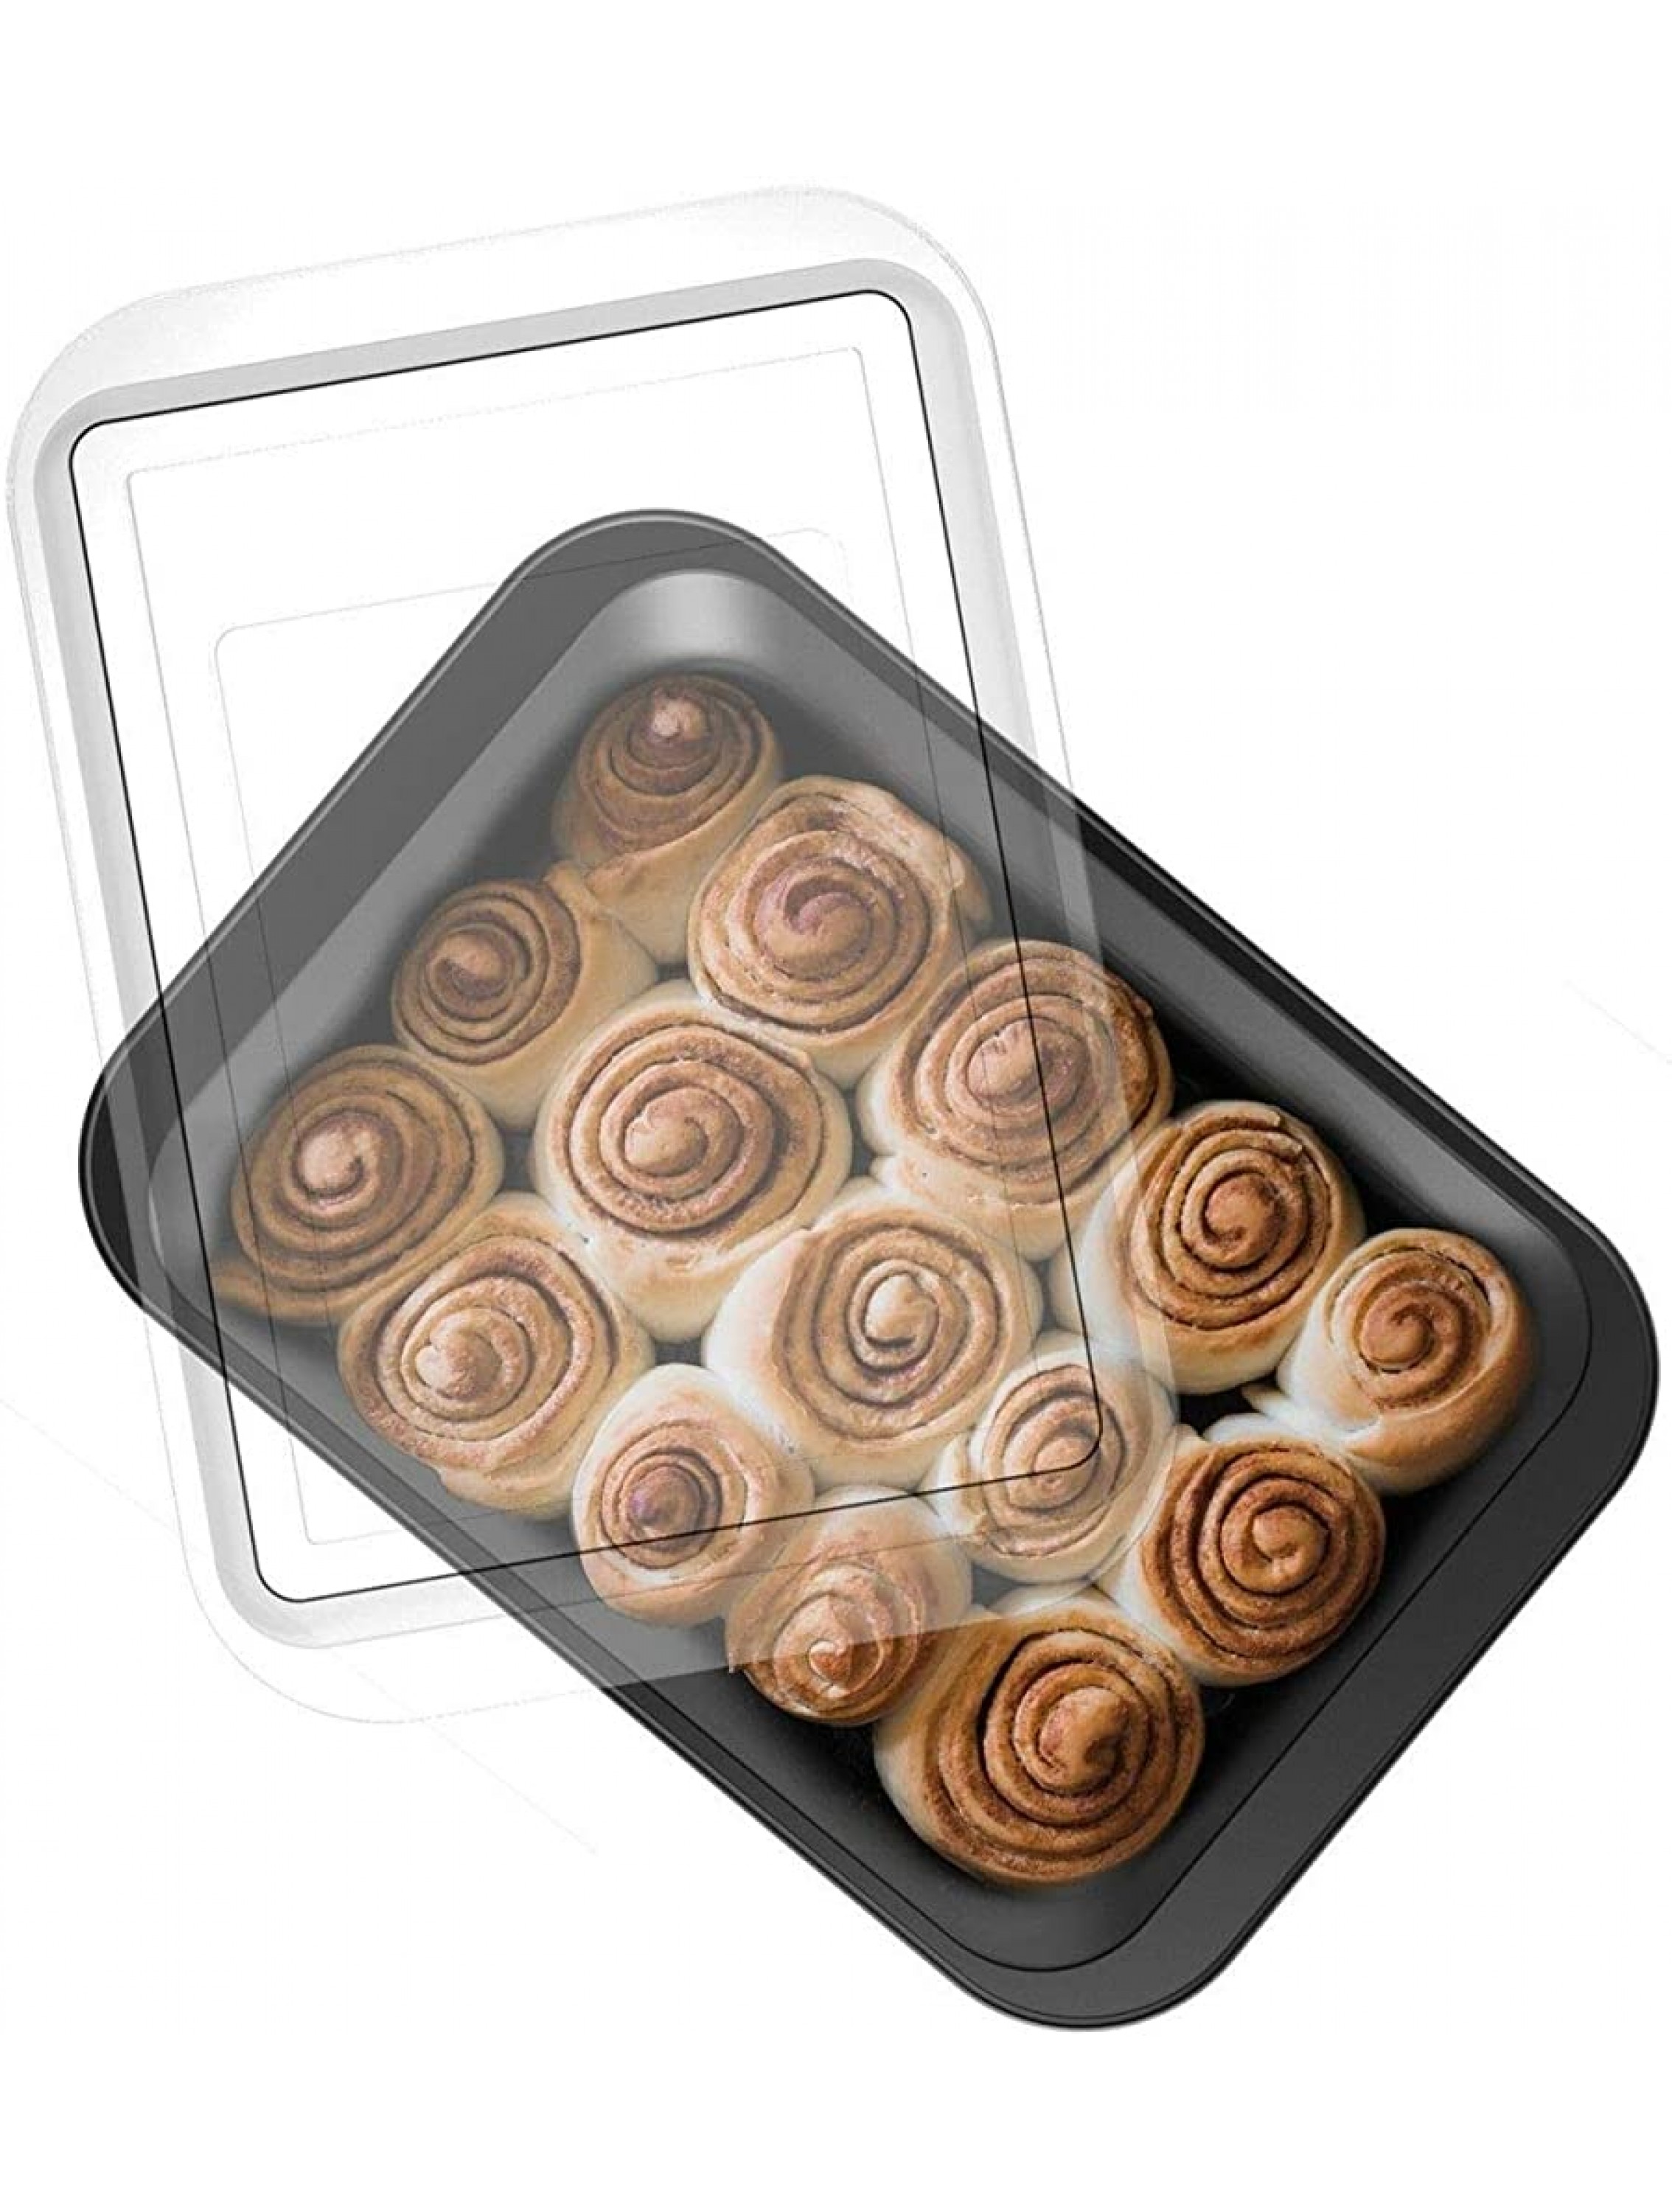 9 x 13 Baking Pan with Snap on Lid Cakes Brownies Lasagna Travel Parties Events K47 - BWUZTQYAW